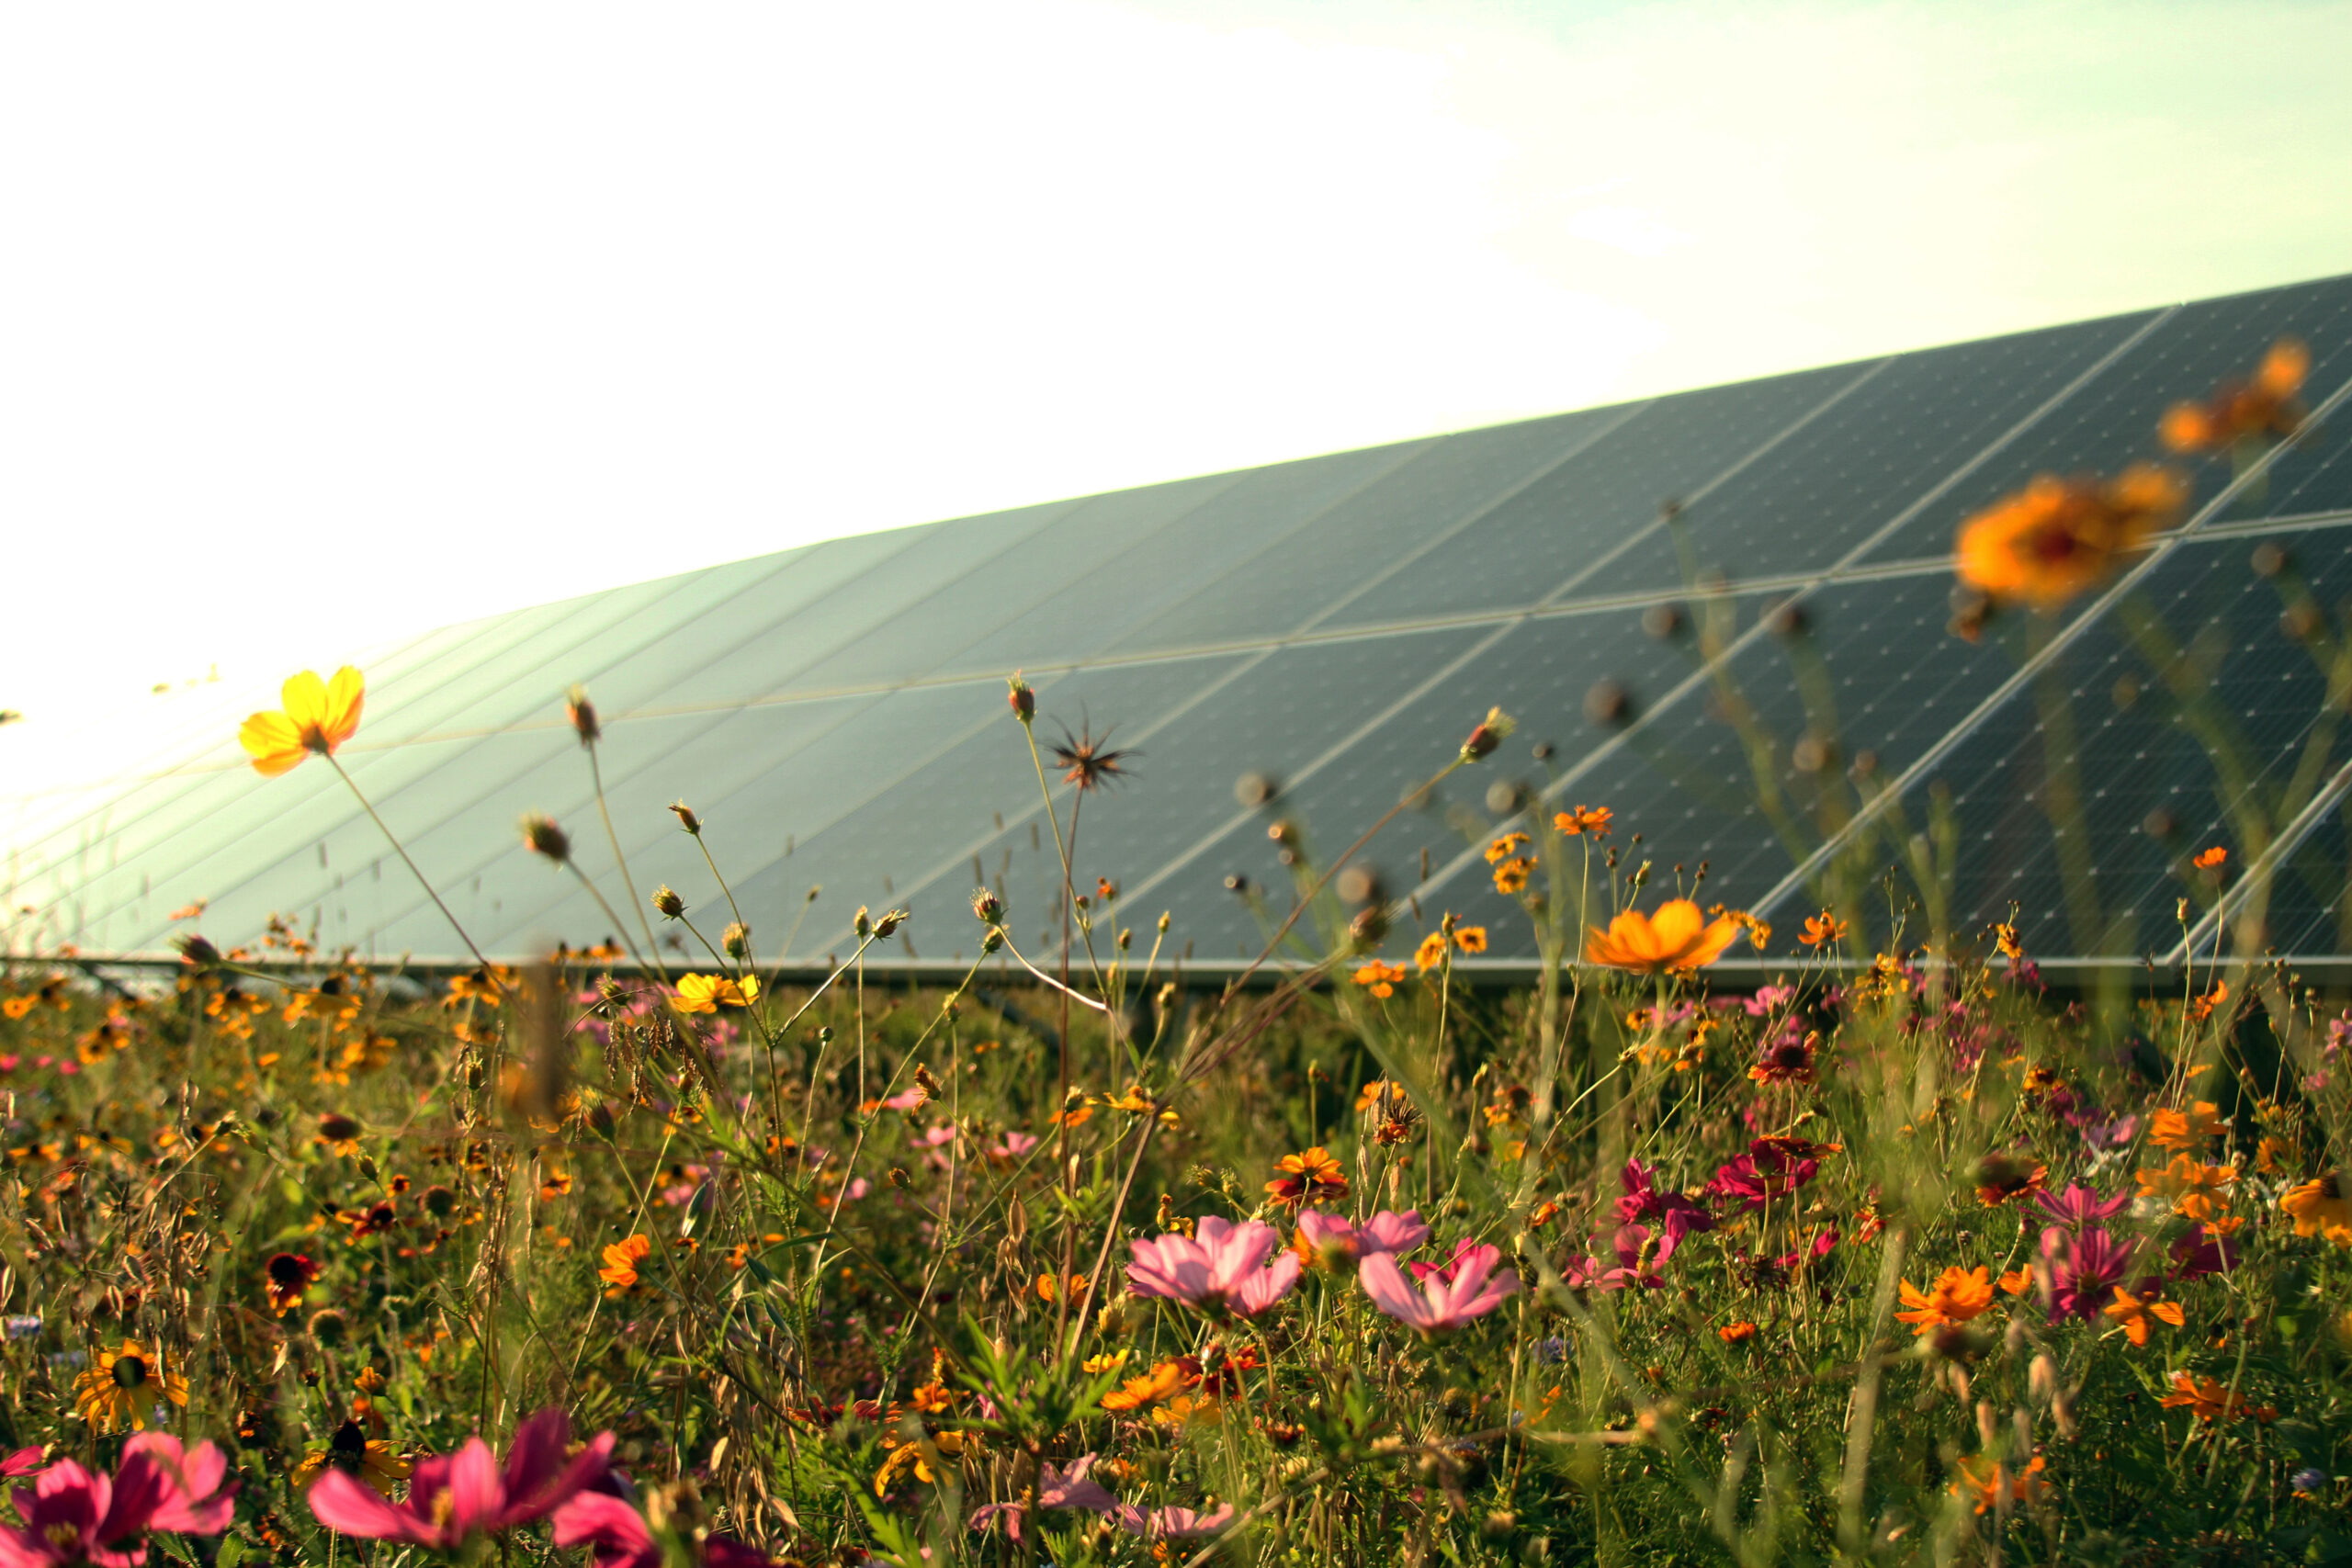 Solar panels in a community solar array surrounded by wildflowers that can help increase pollination